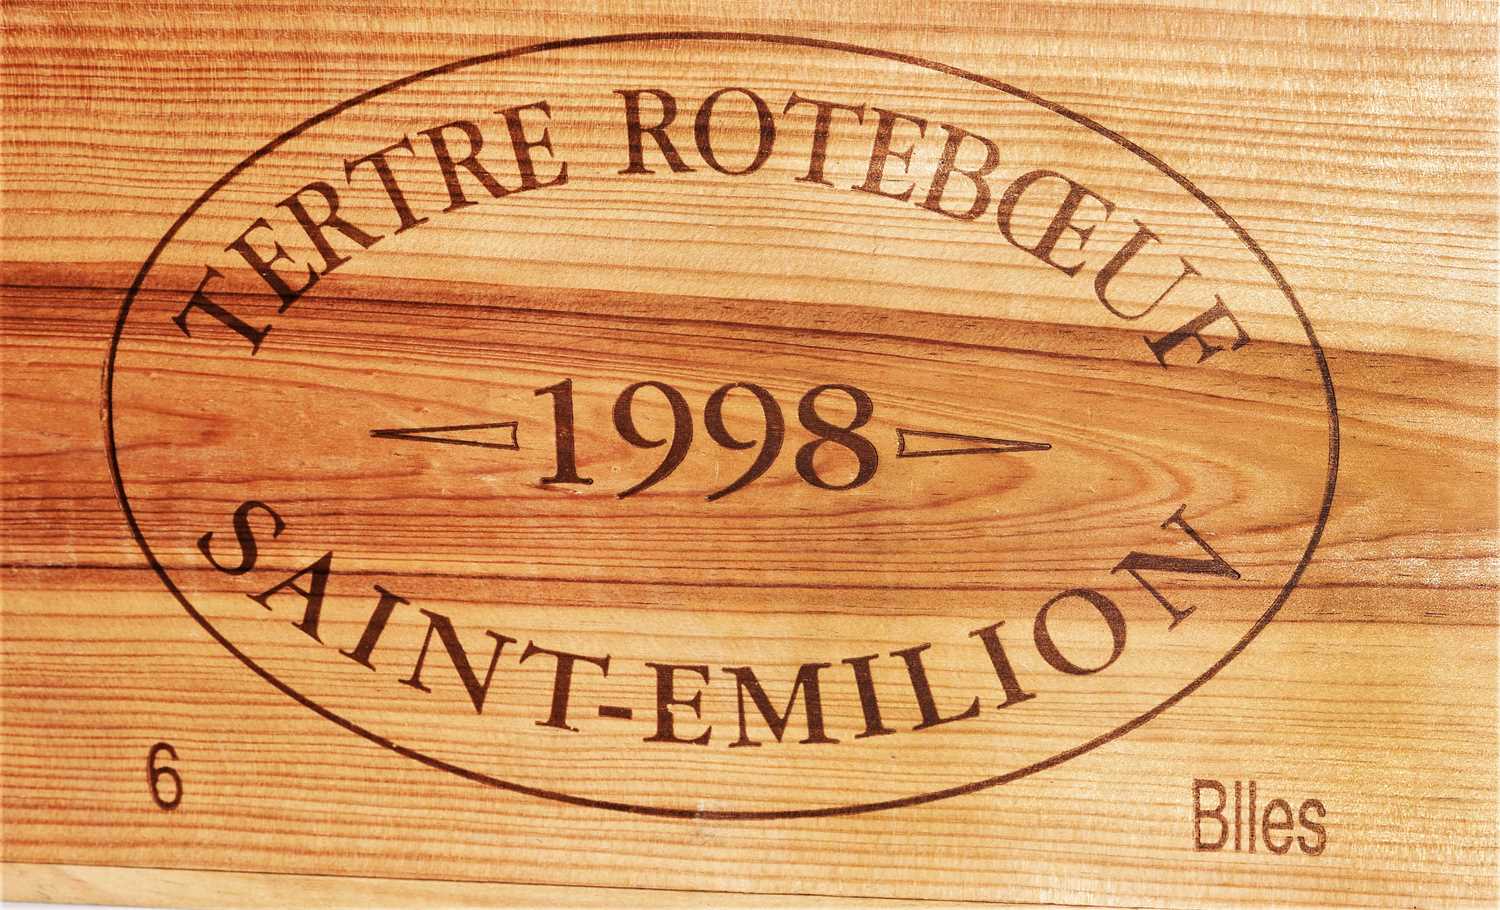 269 - Chateau Tertre Roteboeuf 1995